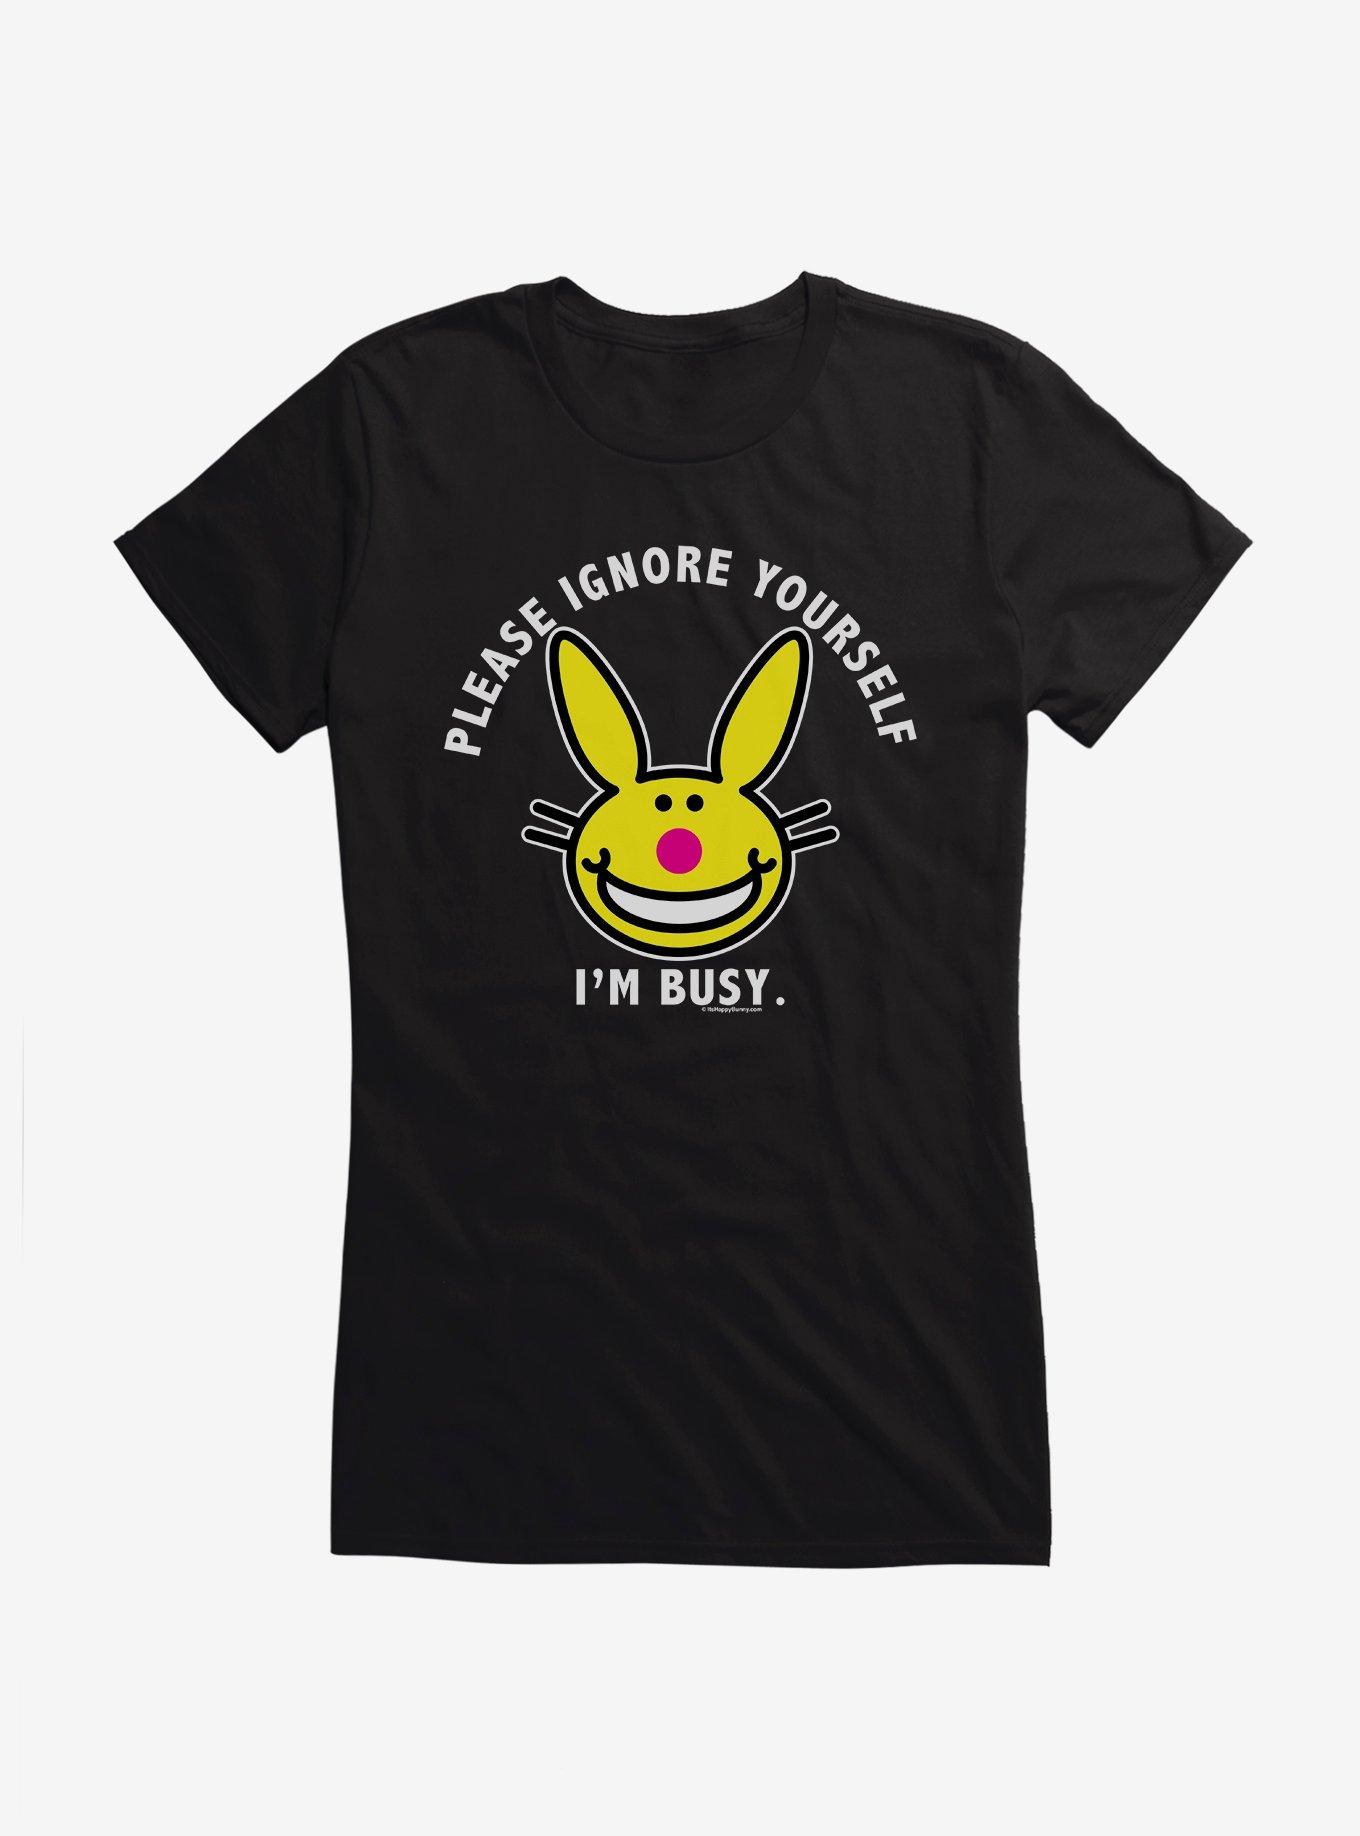 It's Happy Bunny Ignore Yourself Girls T-Shirt